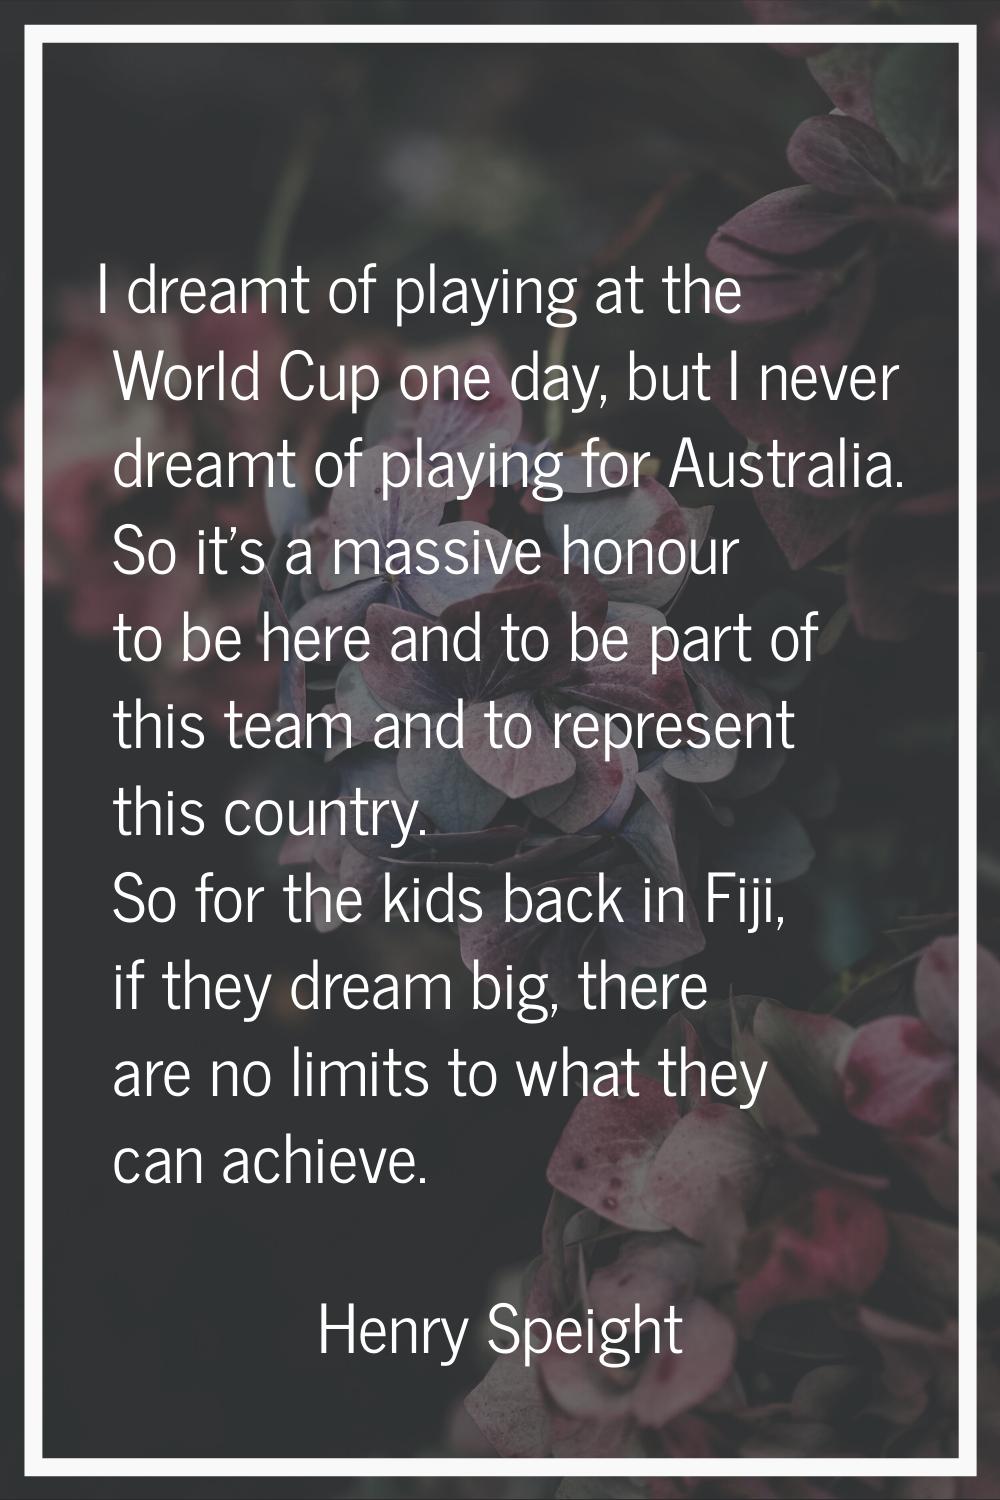 I dreamt of playing at the World Cup one day, but I never dreamt of playing for Australia. So it's 